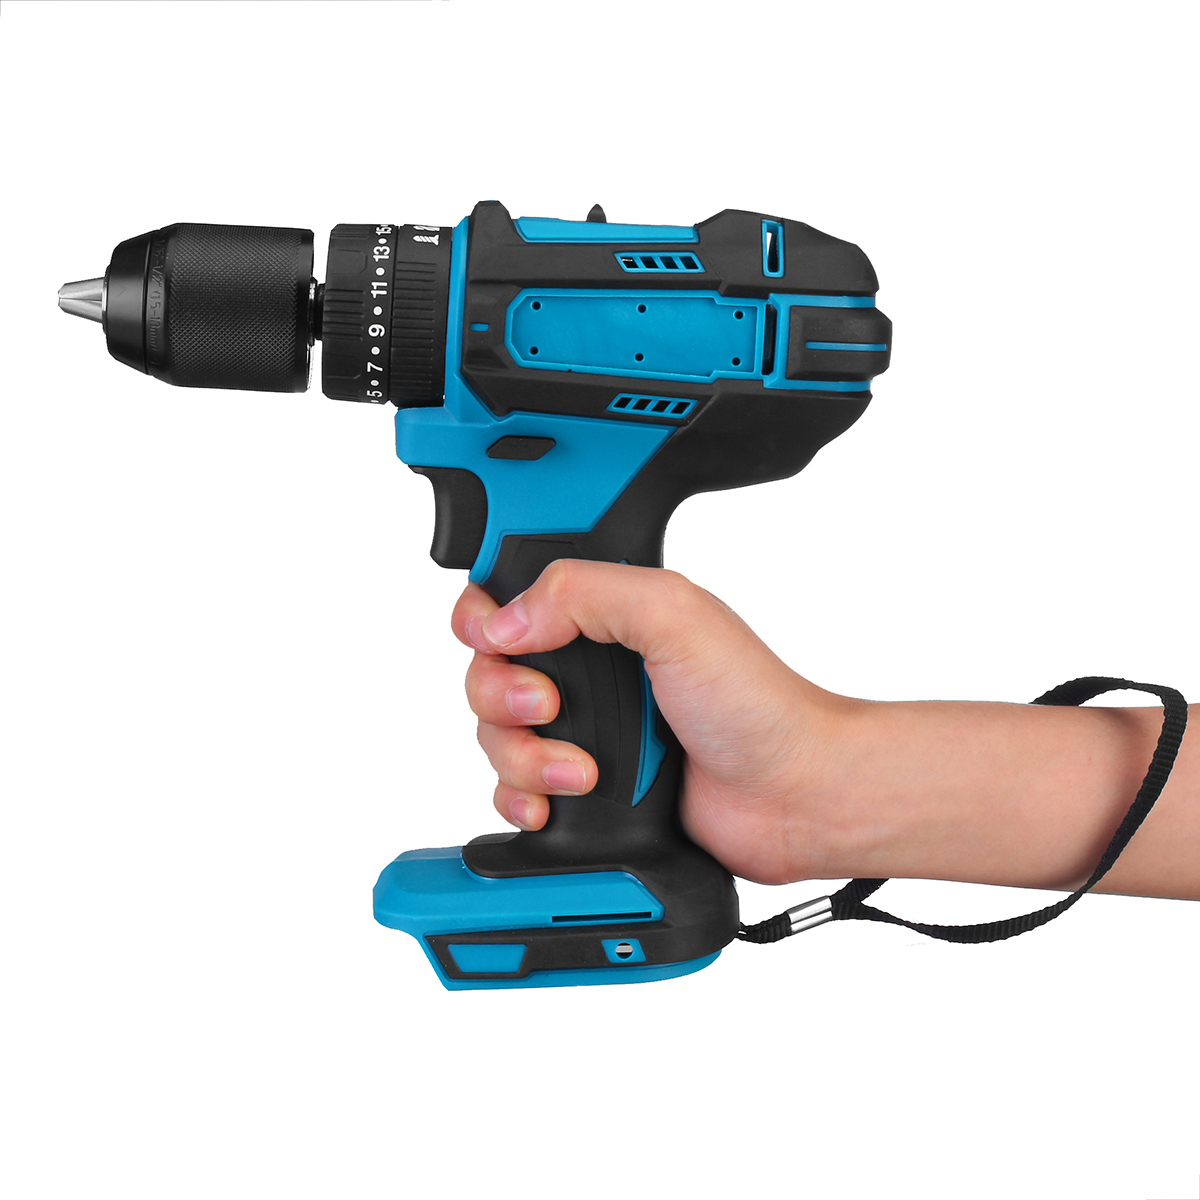 18V-Cordless-Electric-Drill-Driver-Impact-Torque-For-MakitaPower-Tool-1695066-7